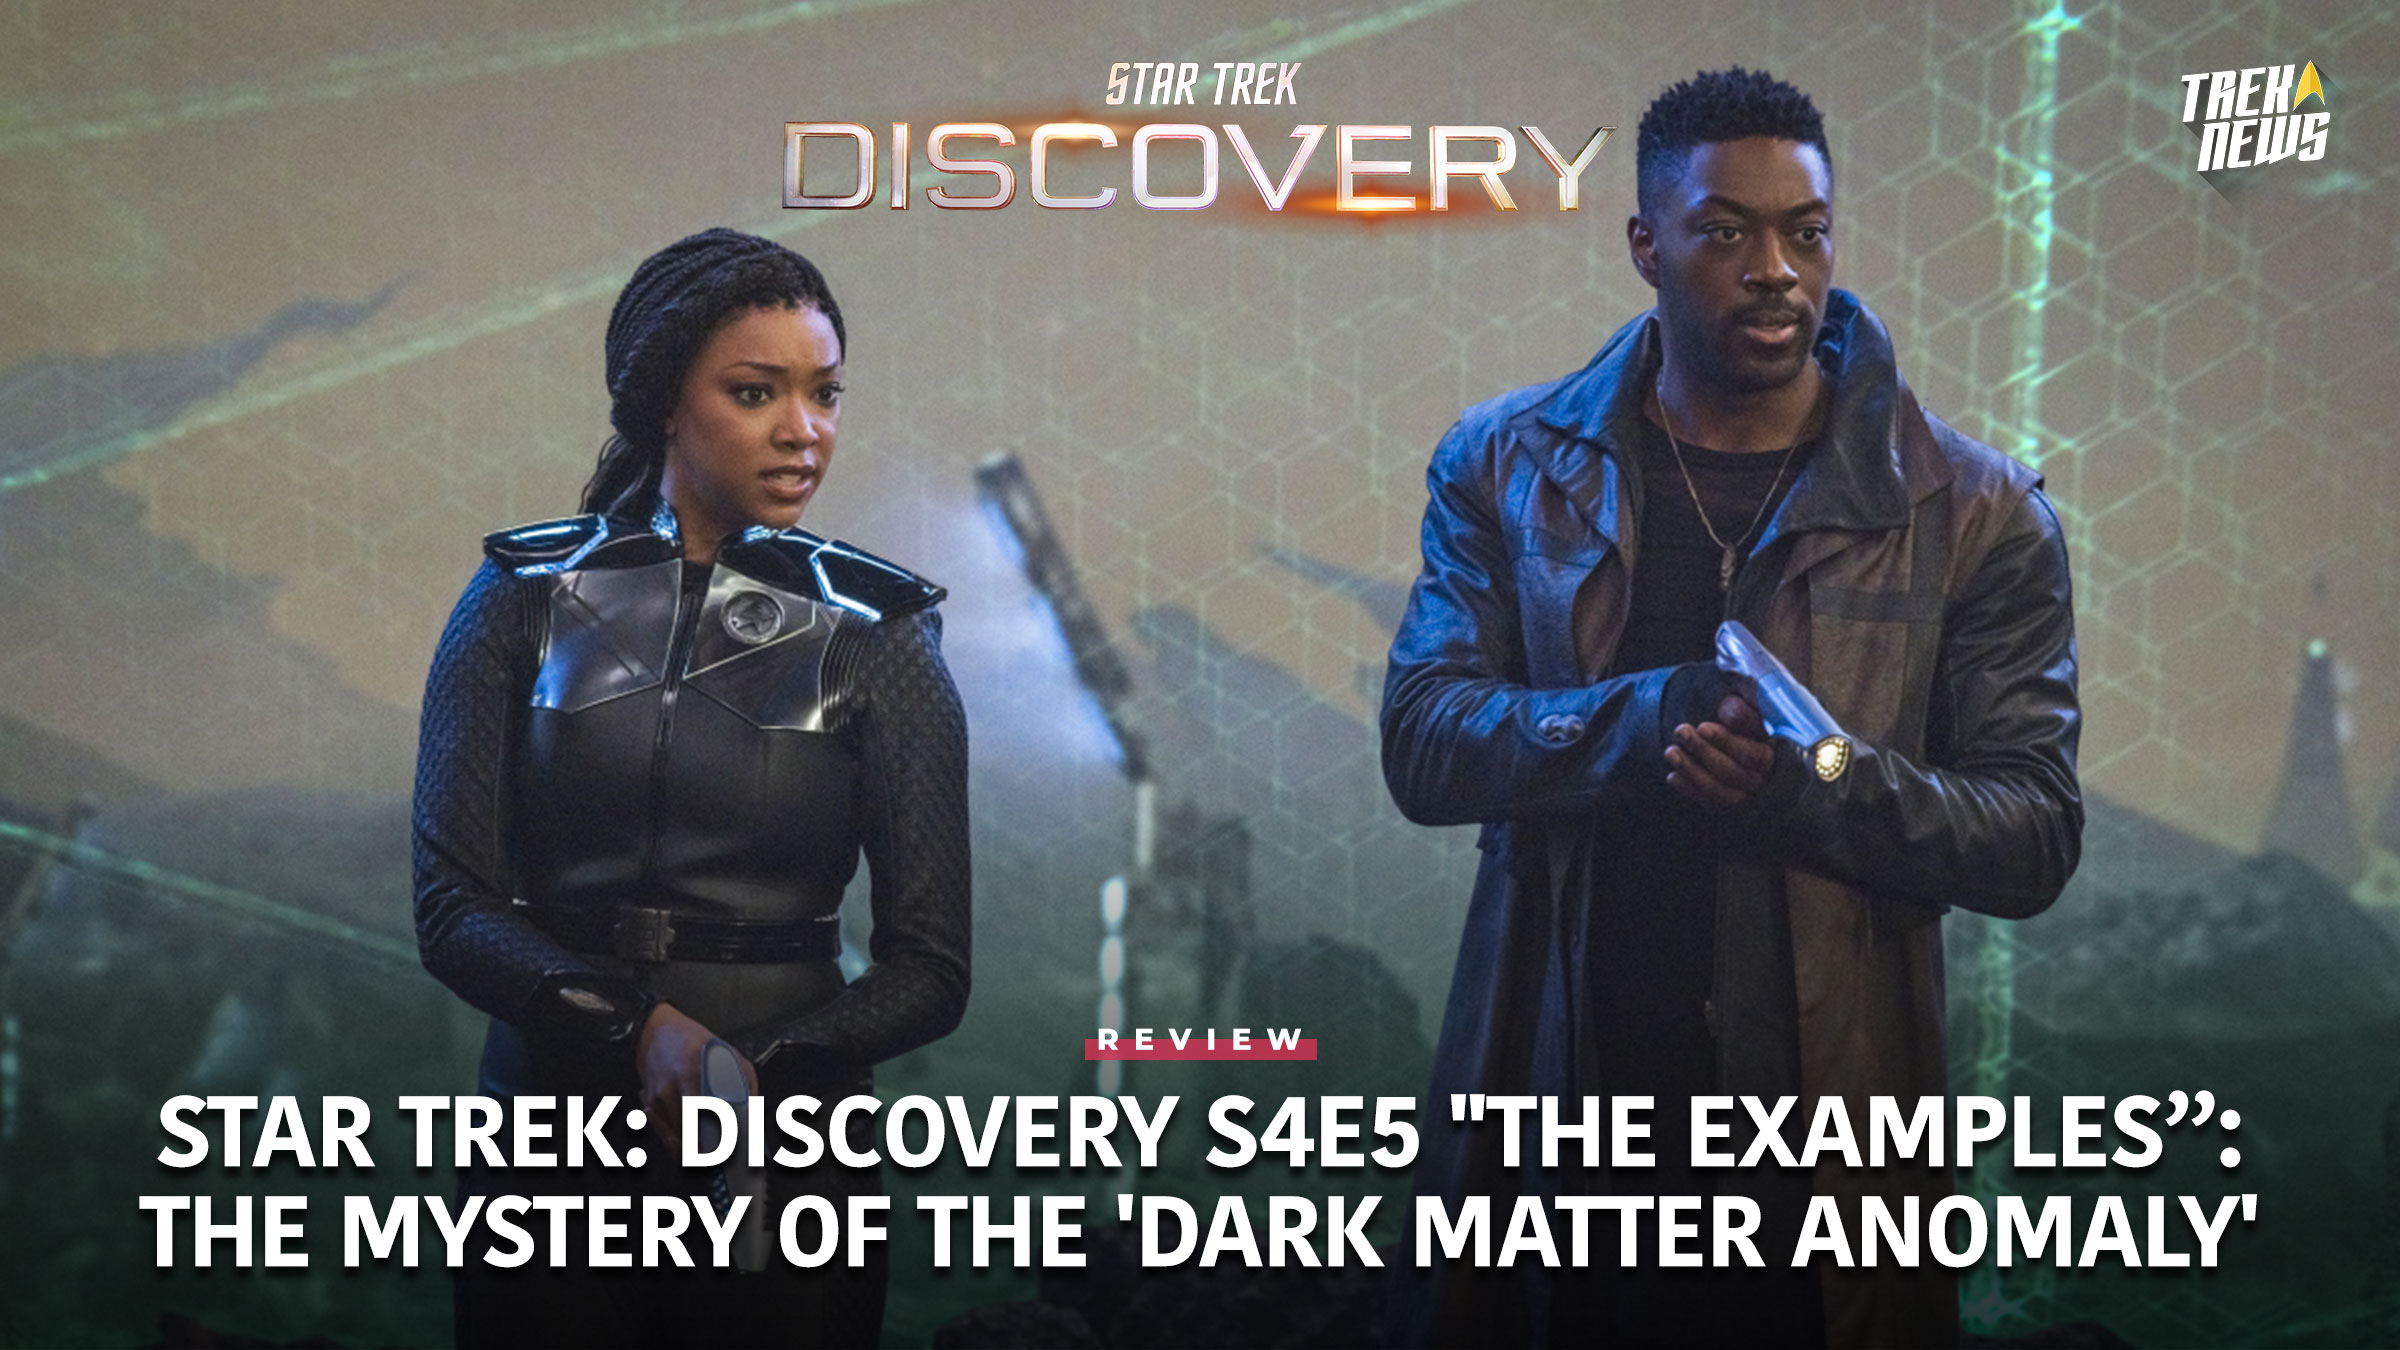 Star Trek: Discovery Episode 405 “The Examples” Review: The Mystery Of The ‘Dark Matter Anomaly’ Deepens